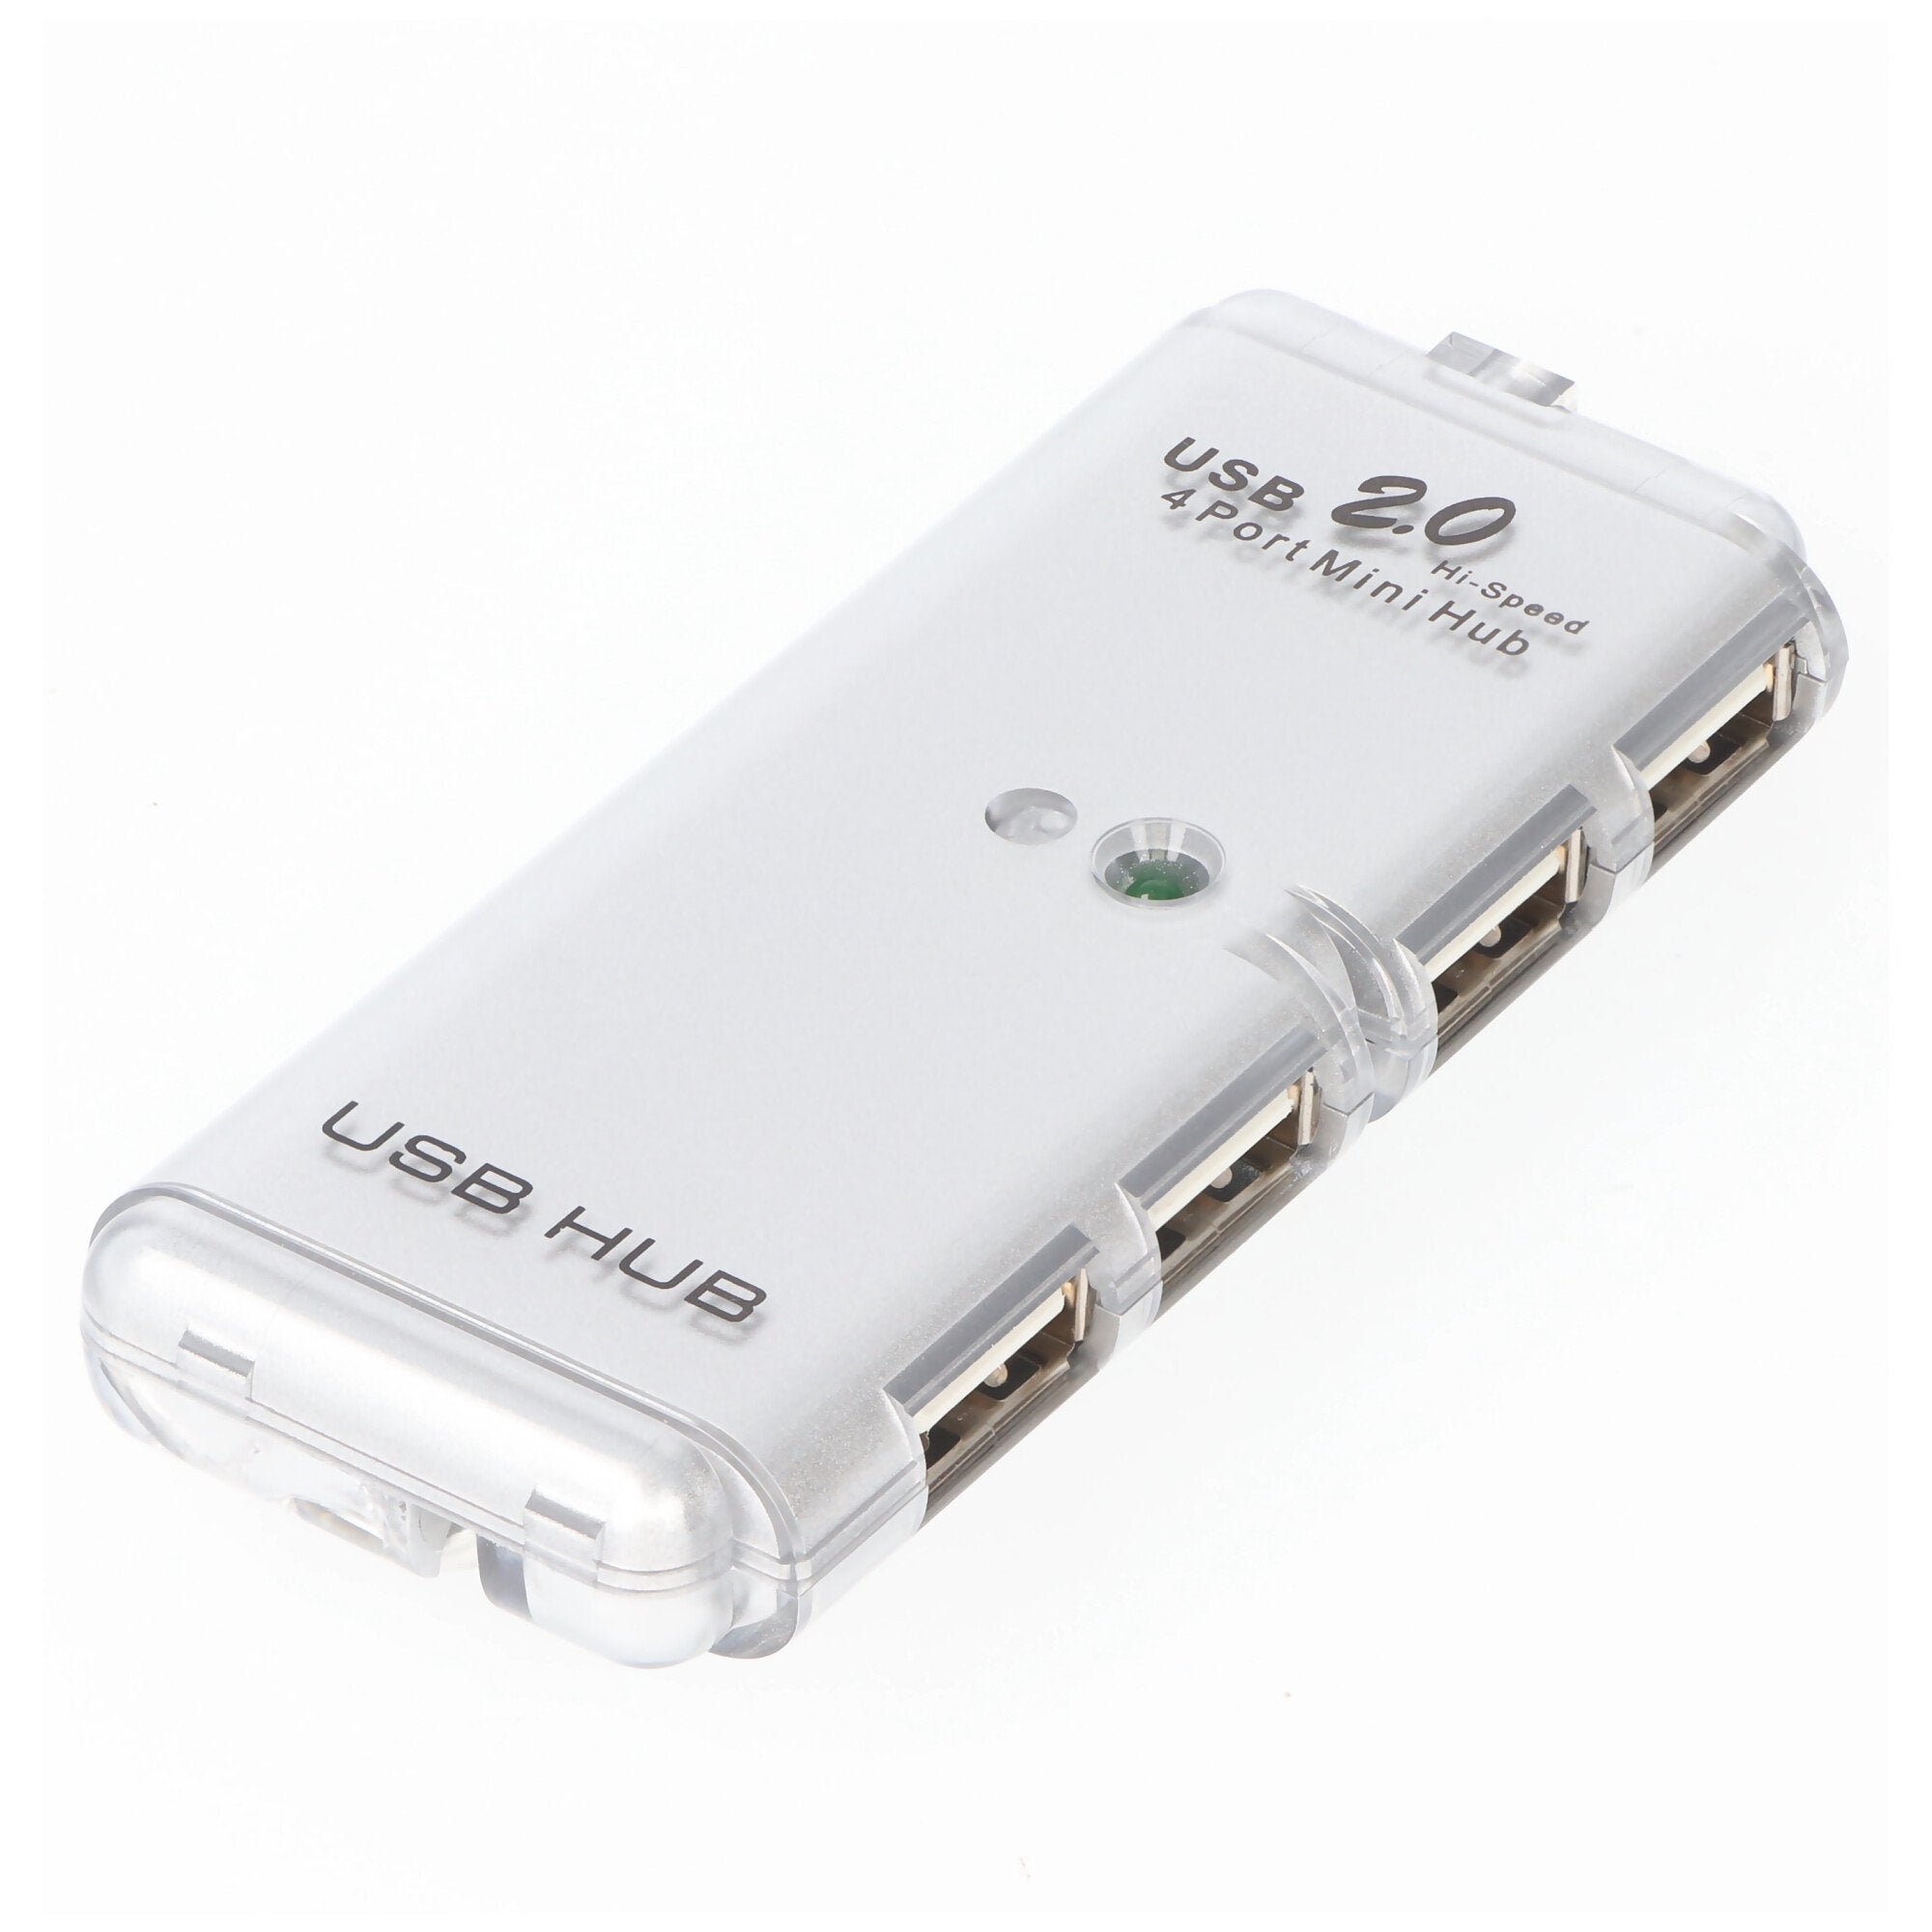 Goobay 4-way USB 2.0 Hi-Speed HUB/distributor - for connecting up to 4 USB devices to a USB port